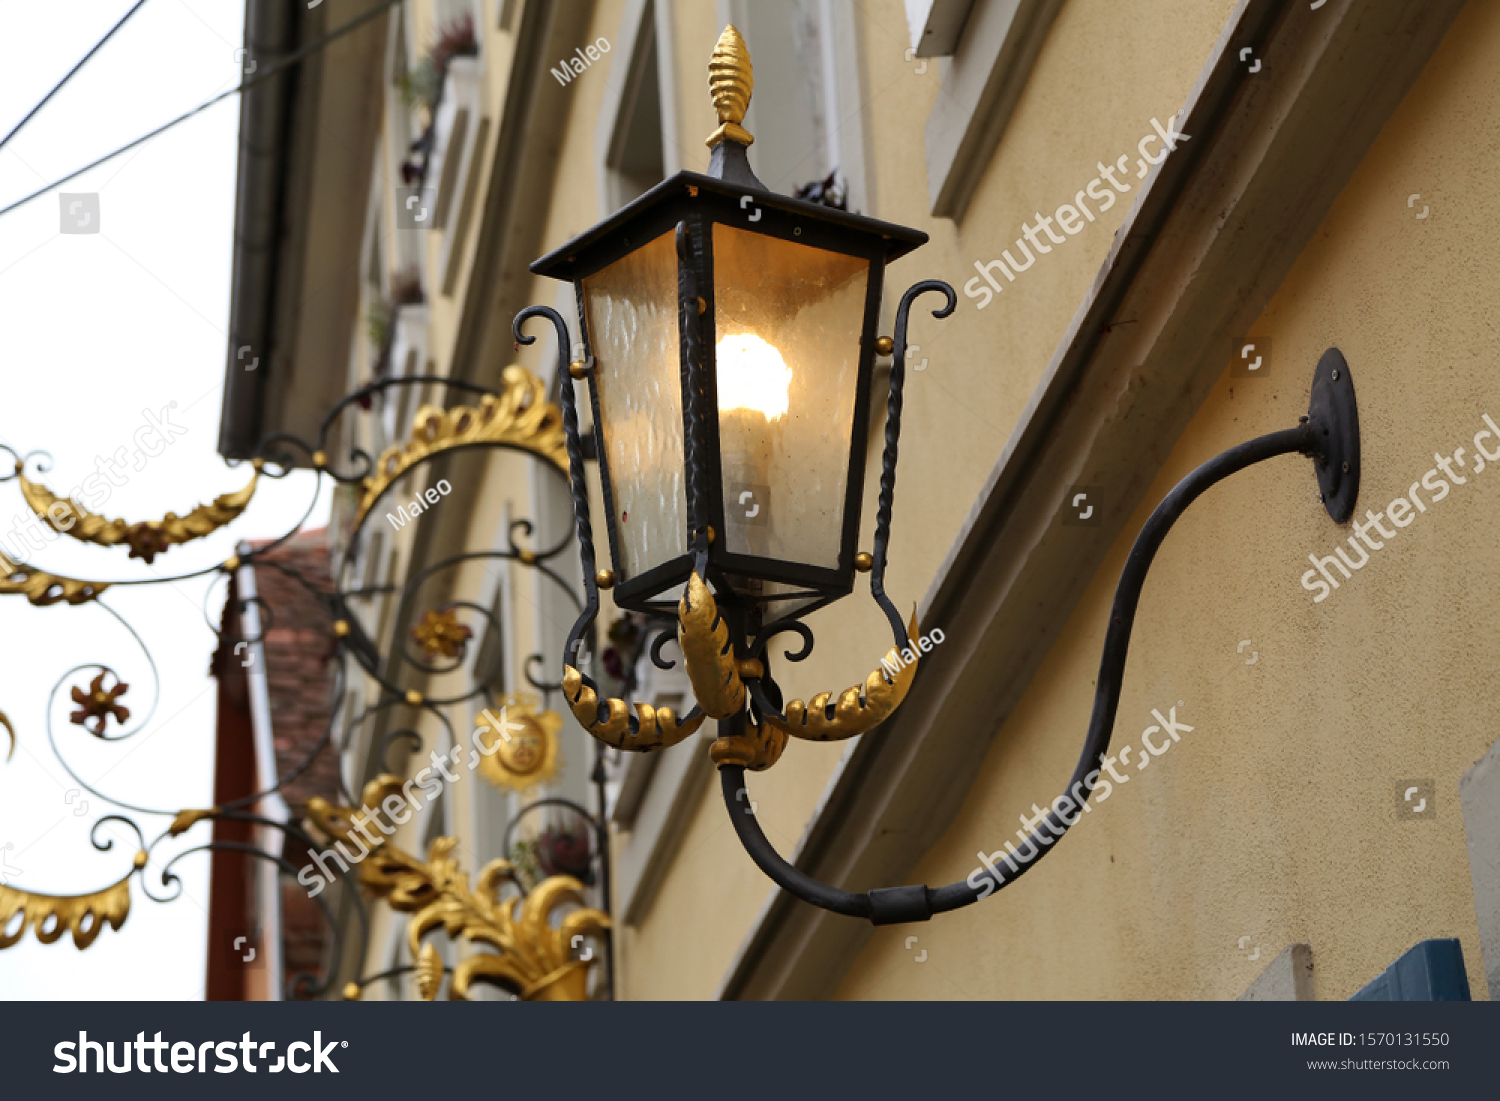 Old street lamps illuminate the way for passersby #1570131550